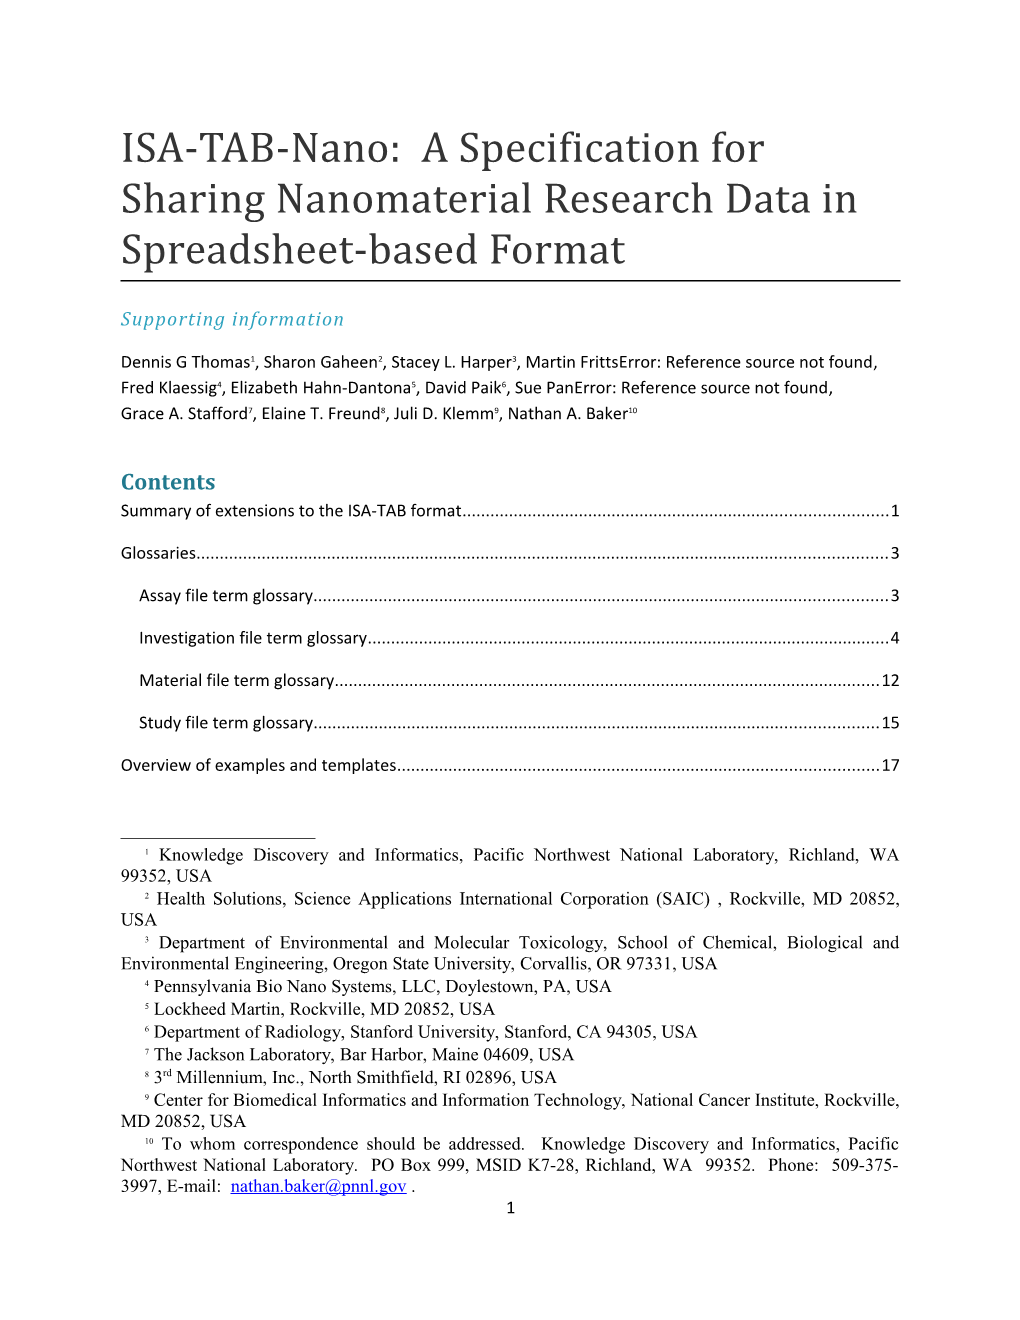 ISA-TAB-Nano: a Specification for Sharing Nanomaterial Research Data in Spreadsheet-Based Format